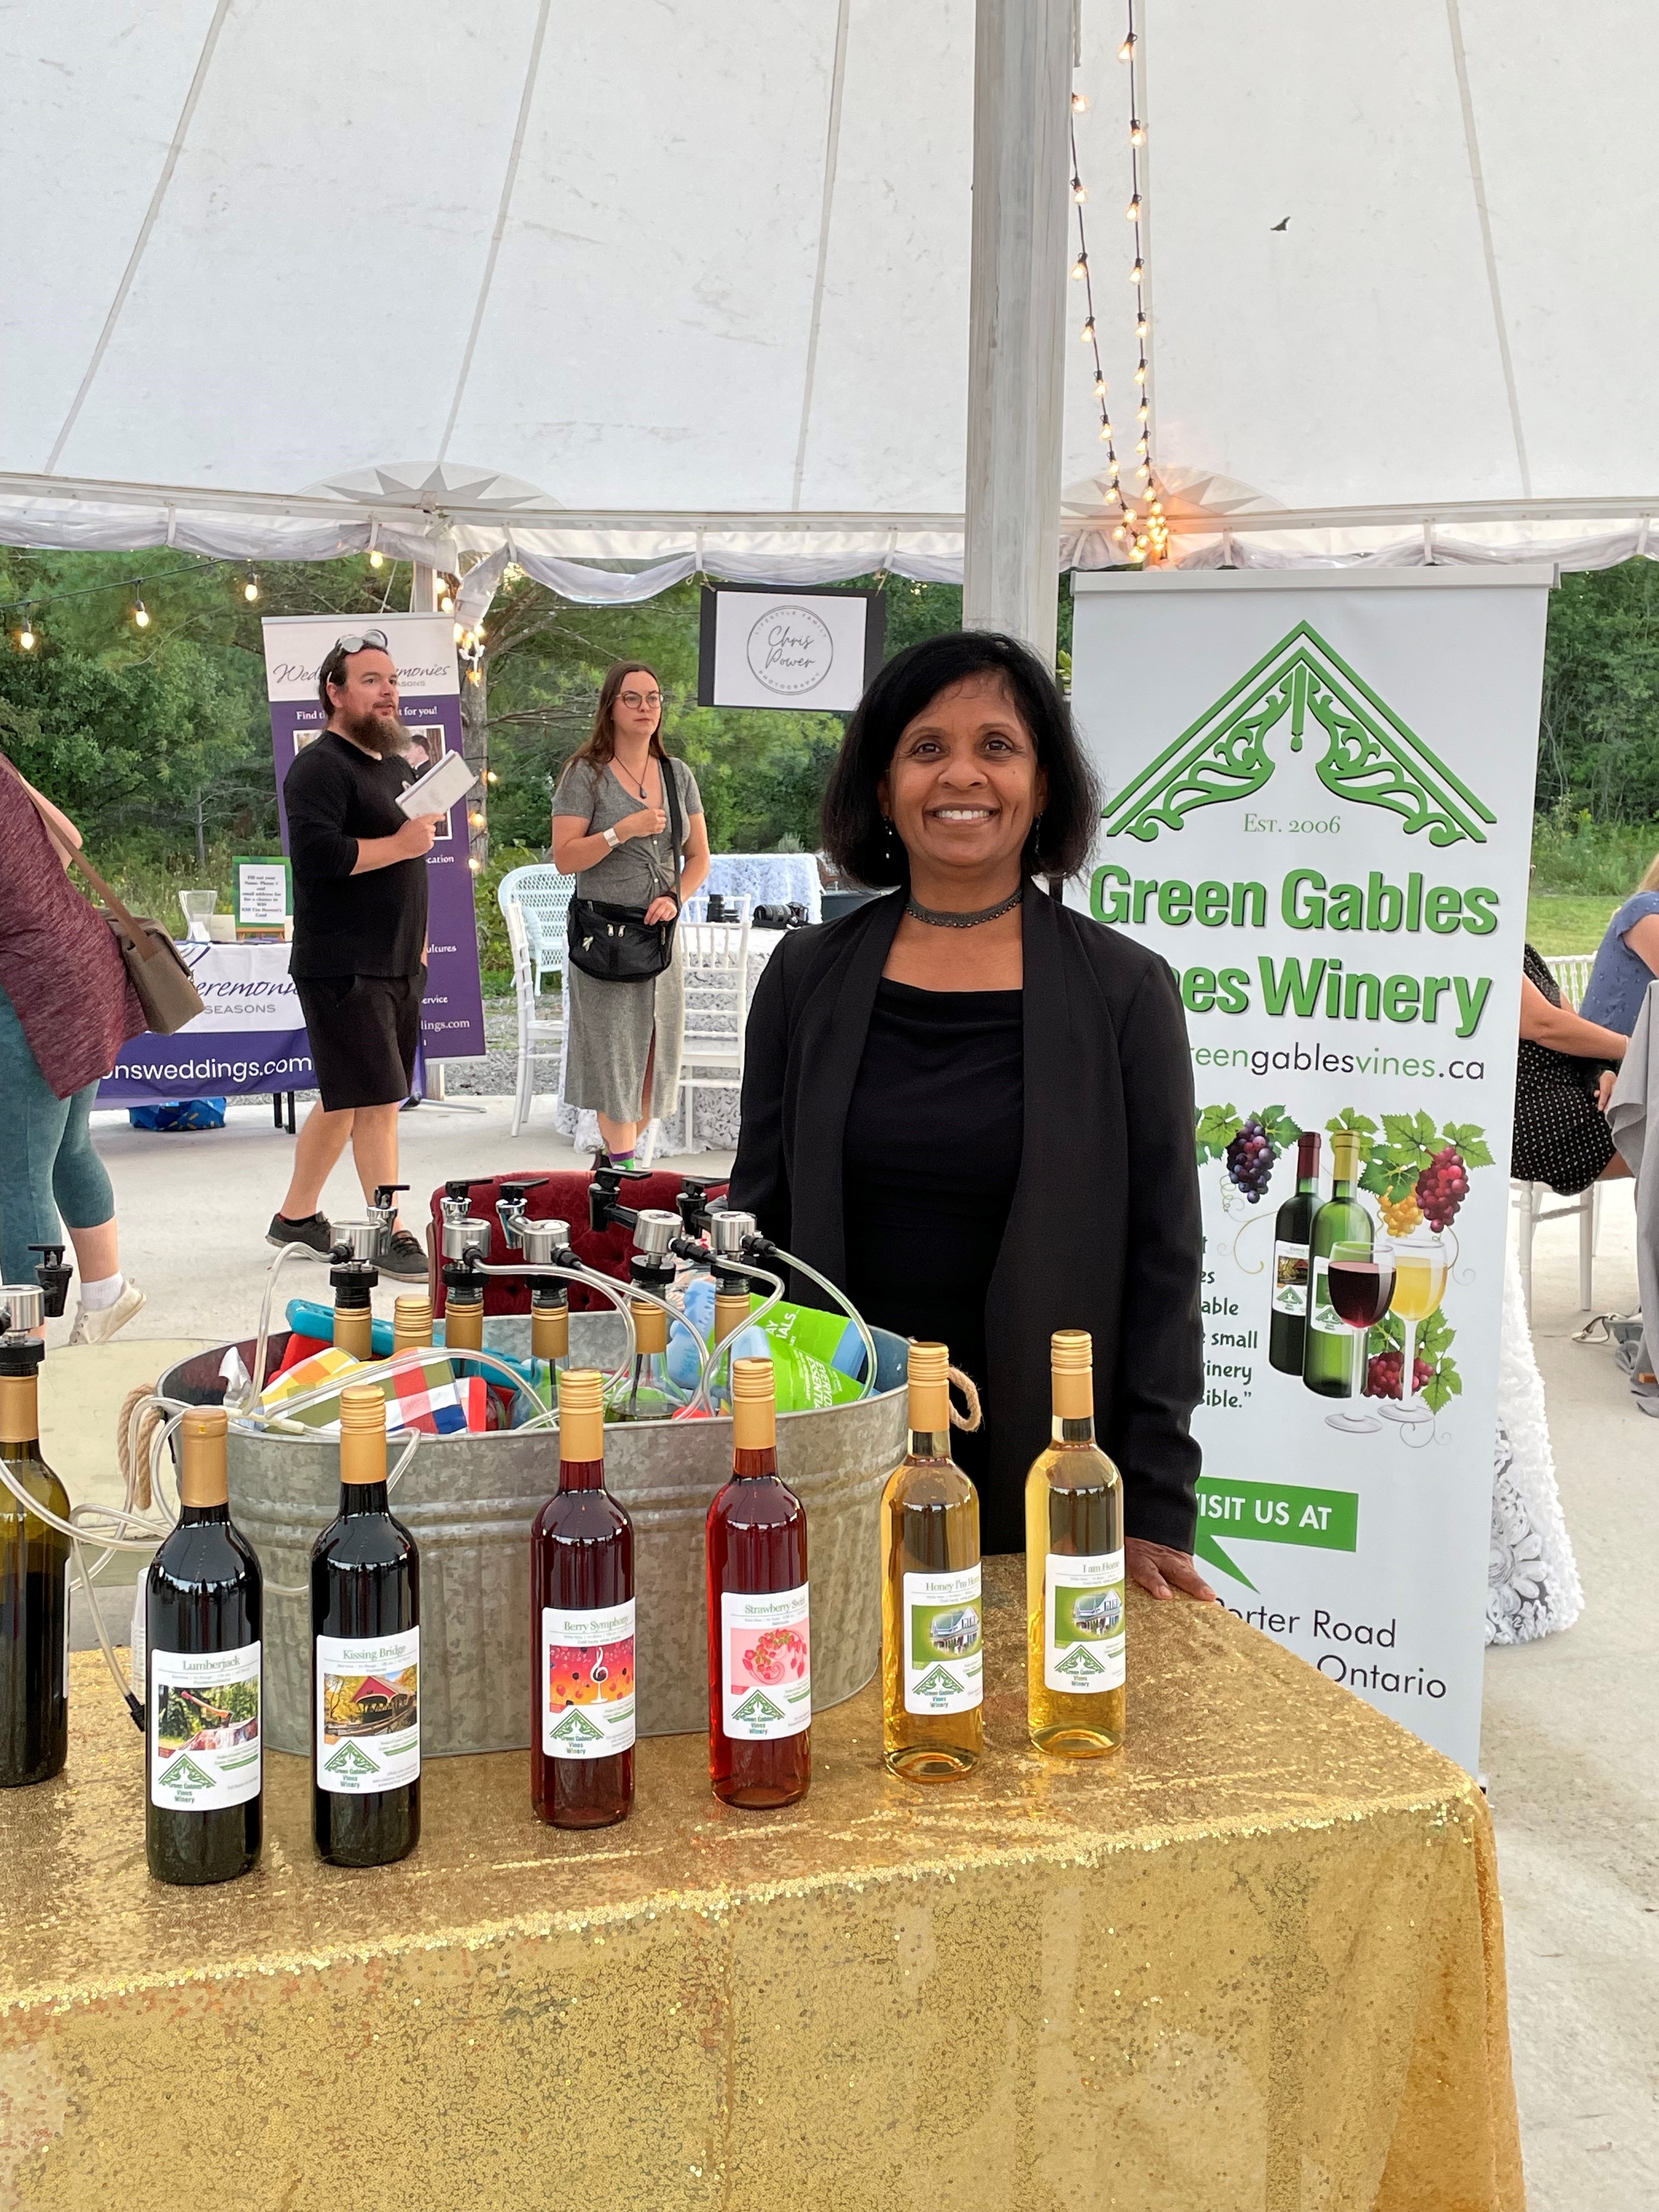 Green Gables Vines winery owner and hostess Marie Chinnatamby displays the wines produced at her winery at a wine show in Merrickville